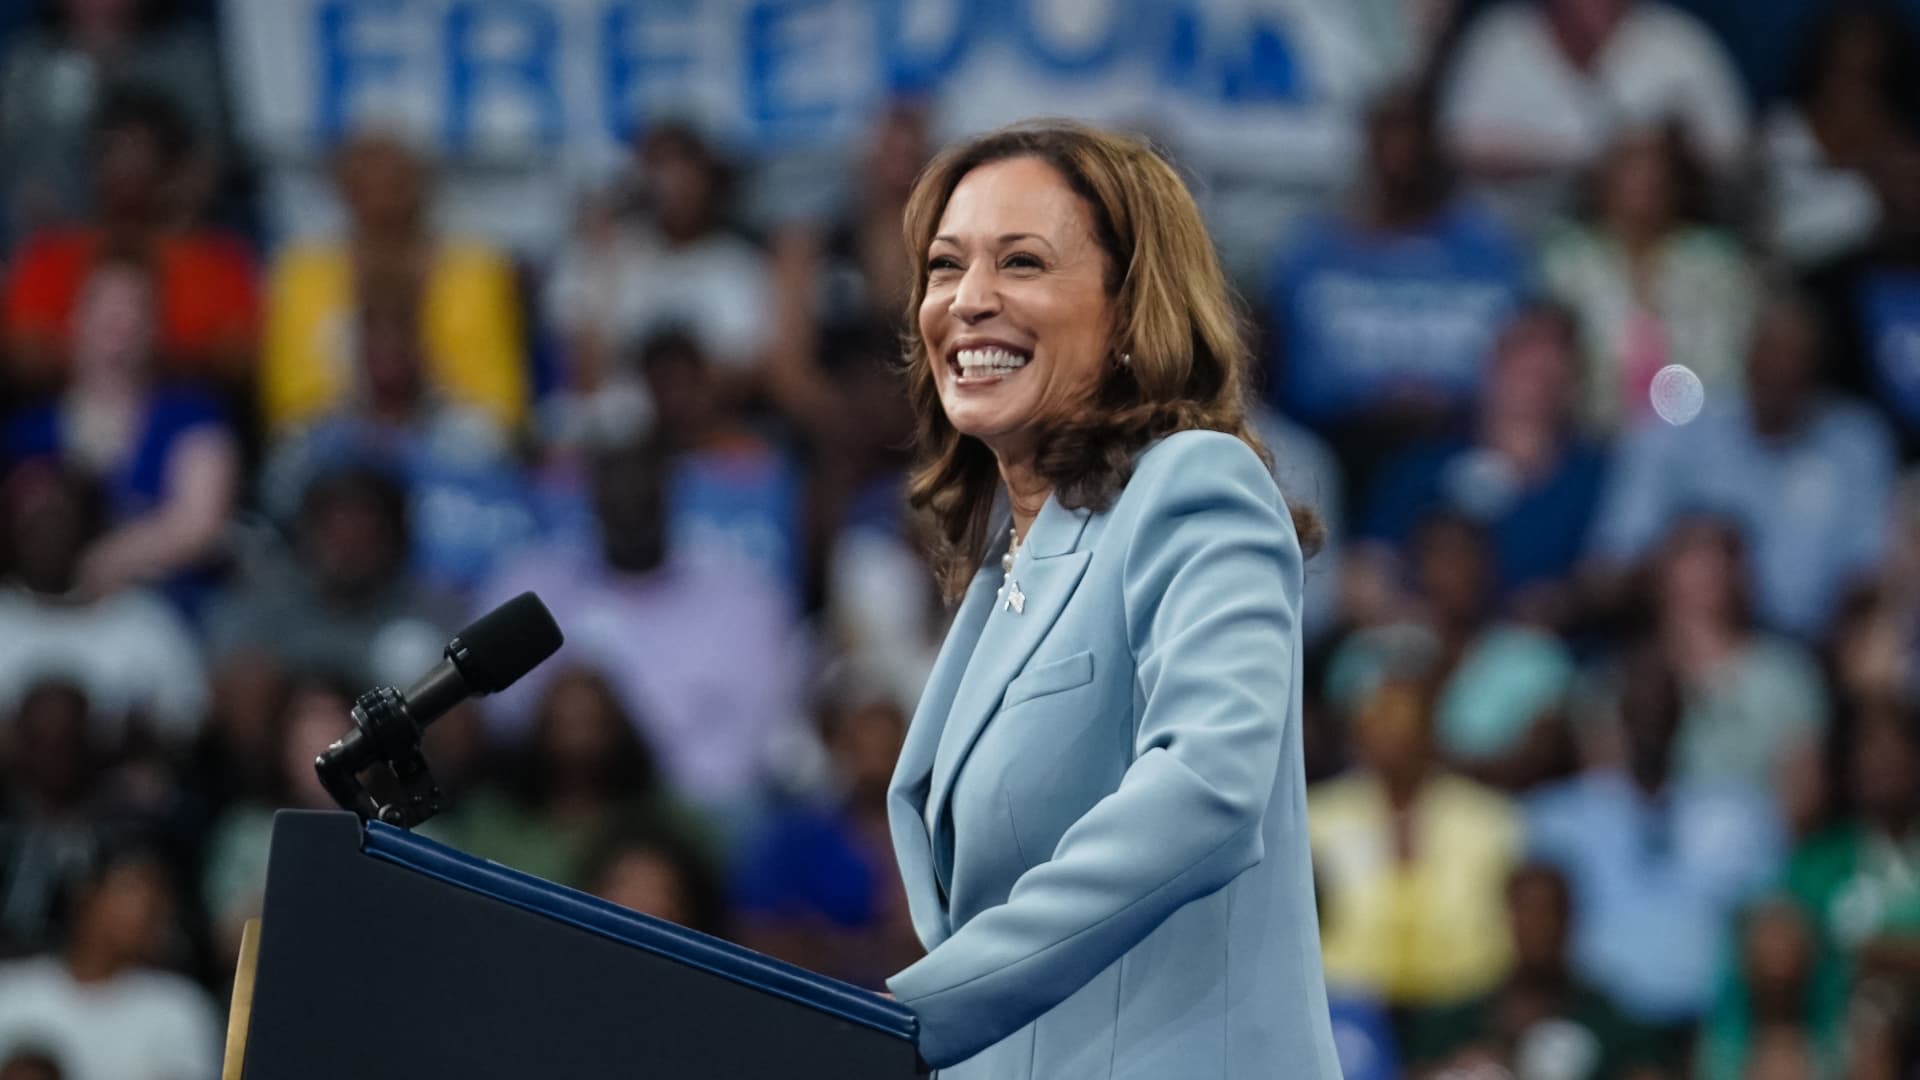 'Building up the middle class will be a defining goal,' Harris says — here's how she may make that happen